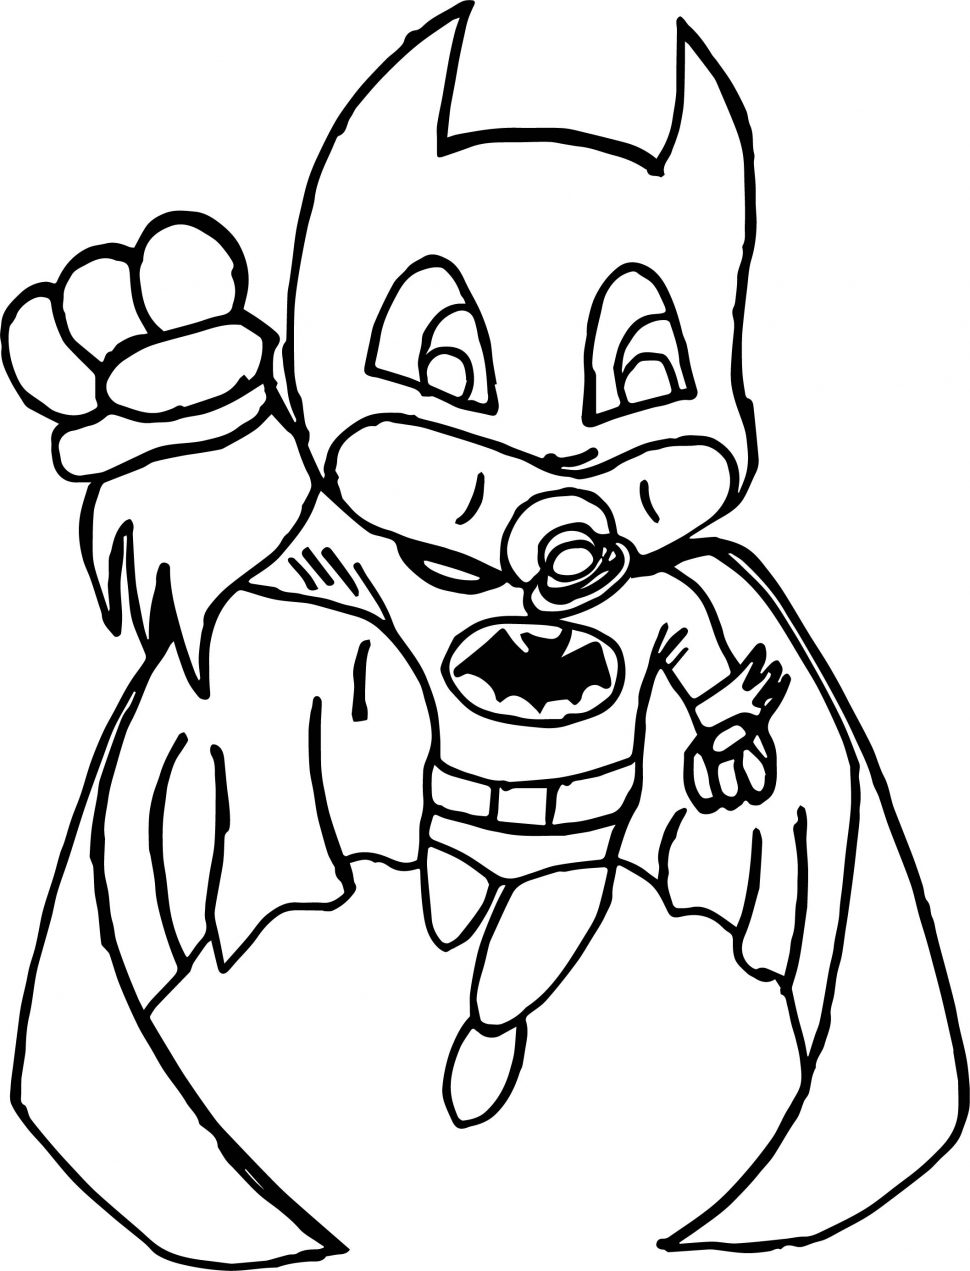 Batman Coloring Pages | Free download on ClipArtMag